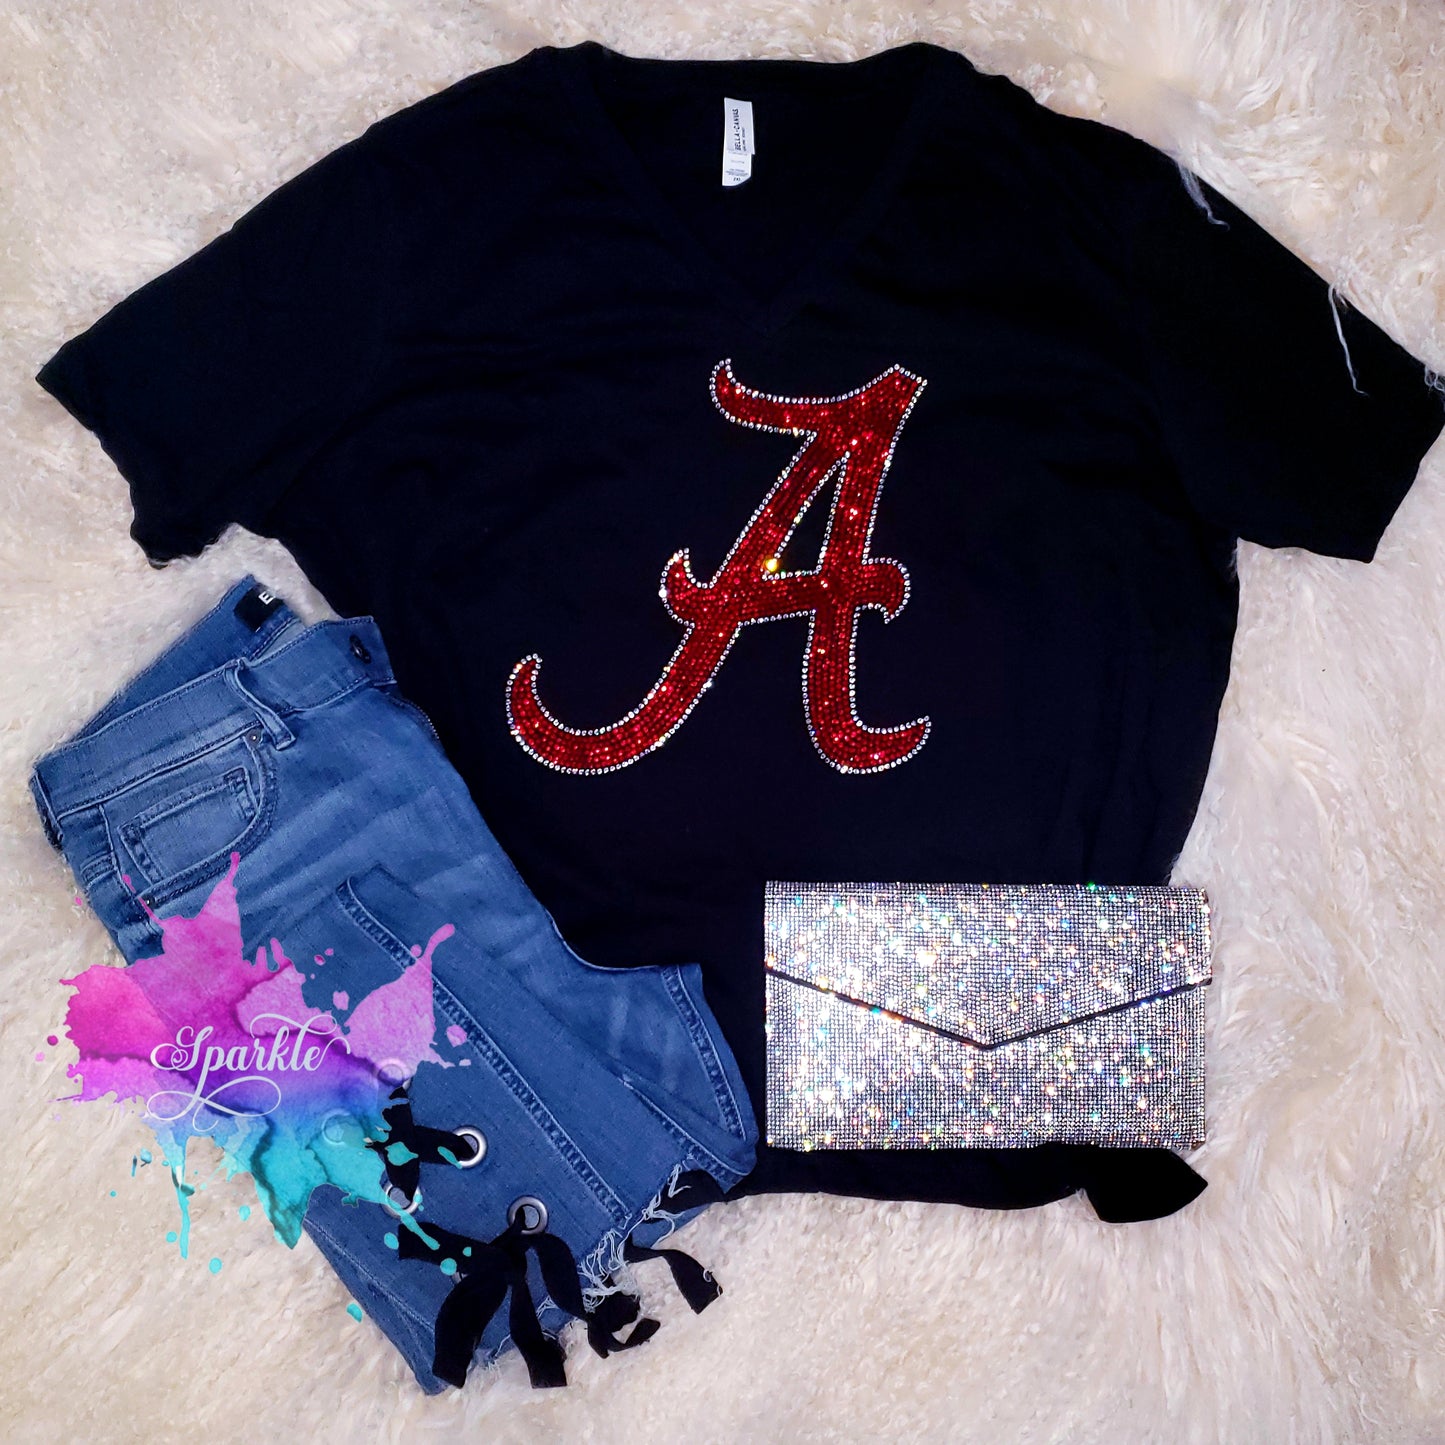 Roll Tide Crystallized Tee